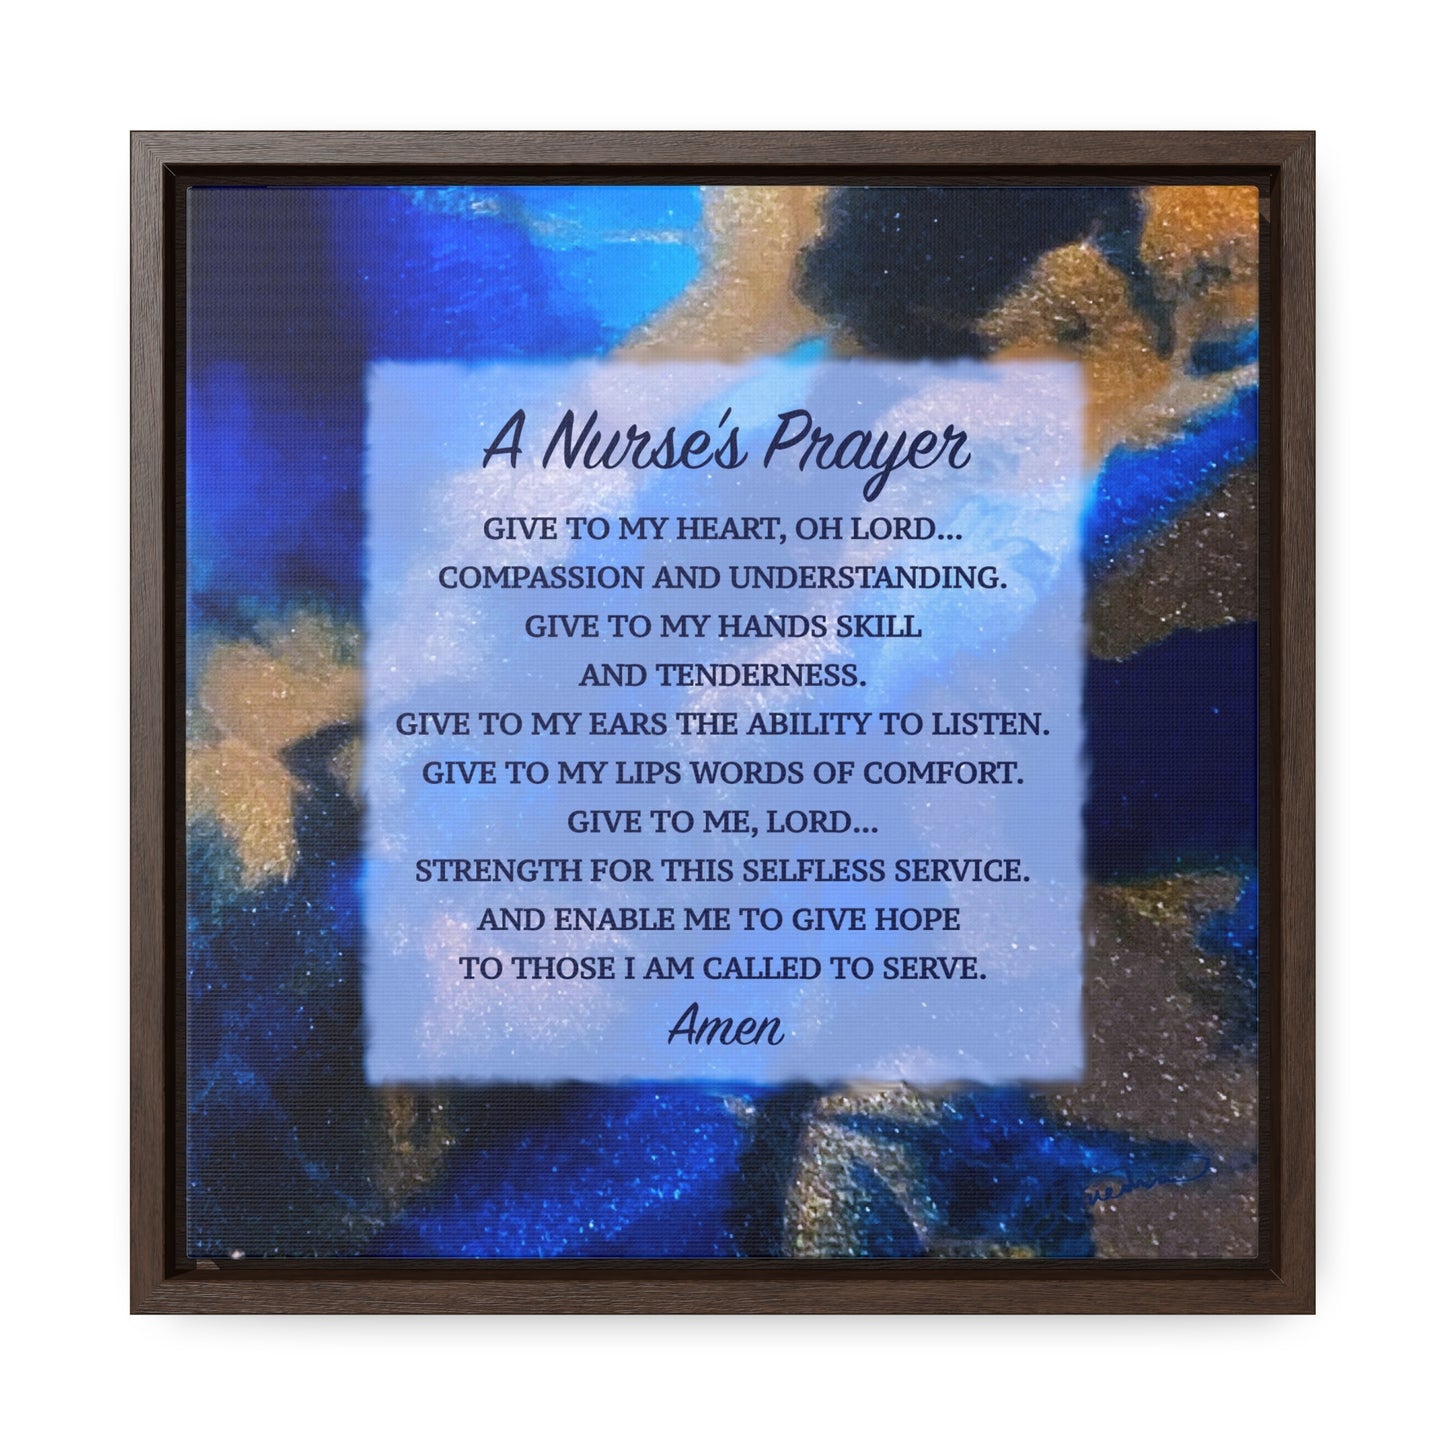 A Nurse's Prayer by Nicole Friedman Gallery Wrapped Canvas in Square Frame